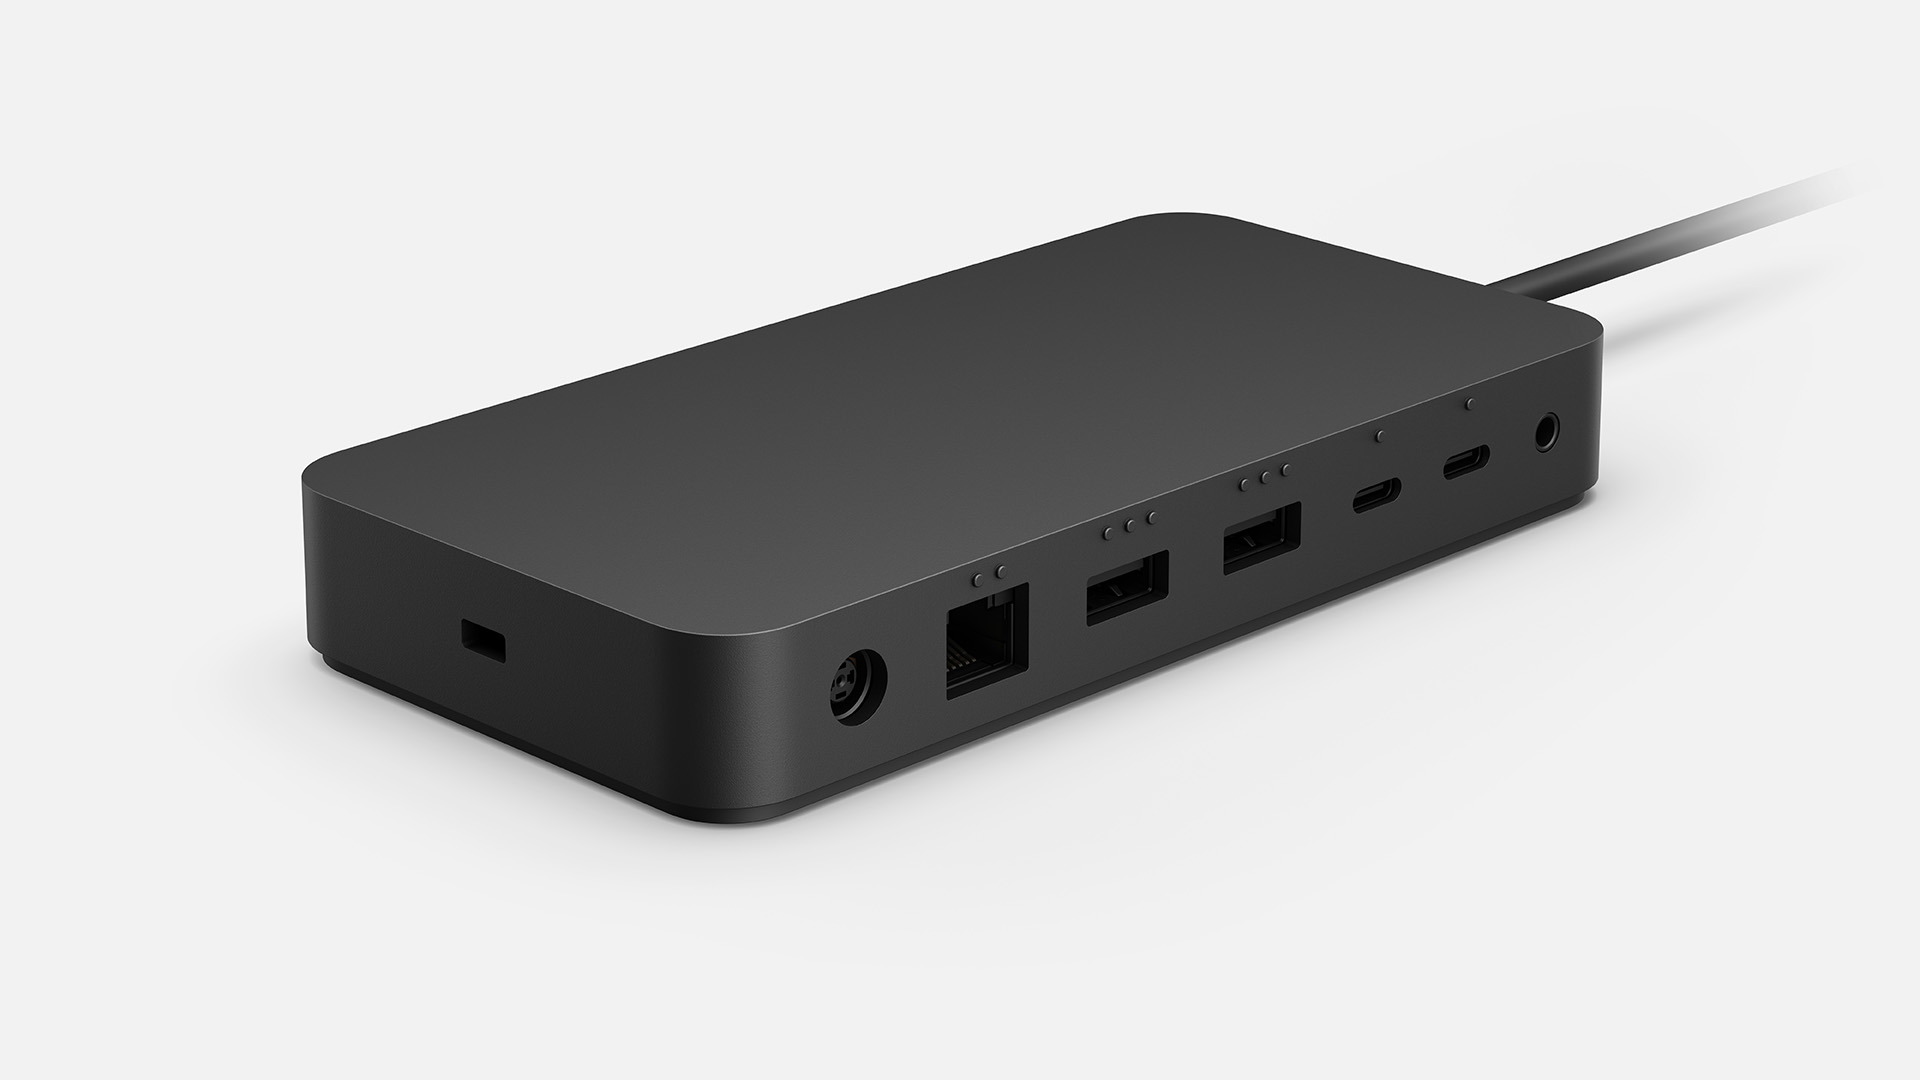 Microsoft puts a Thunderbolt 4 port and a USB-A port on the front;  The power jack, Ethernet port, two more USB-A ports, two Thunderbolt 4 ports and a headphone jack are on the back.  There is also a lock slot on the right side. 